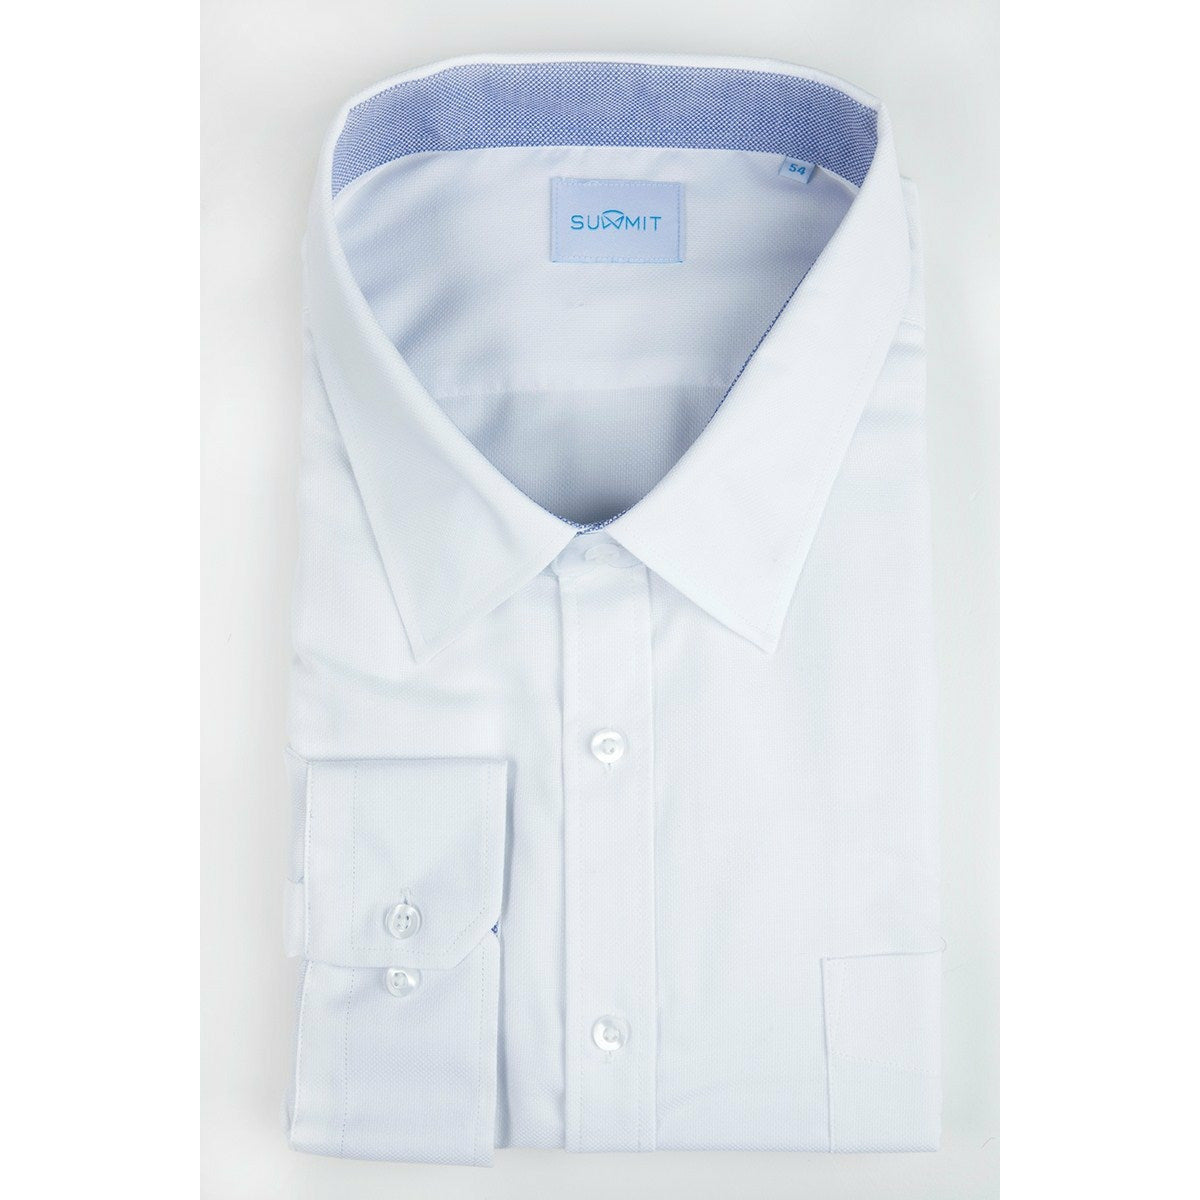 Summit Business Shirt in White Oxford